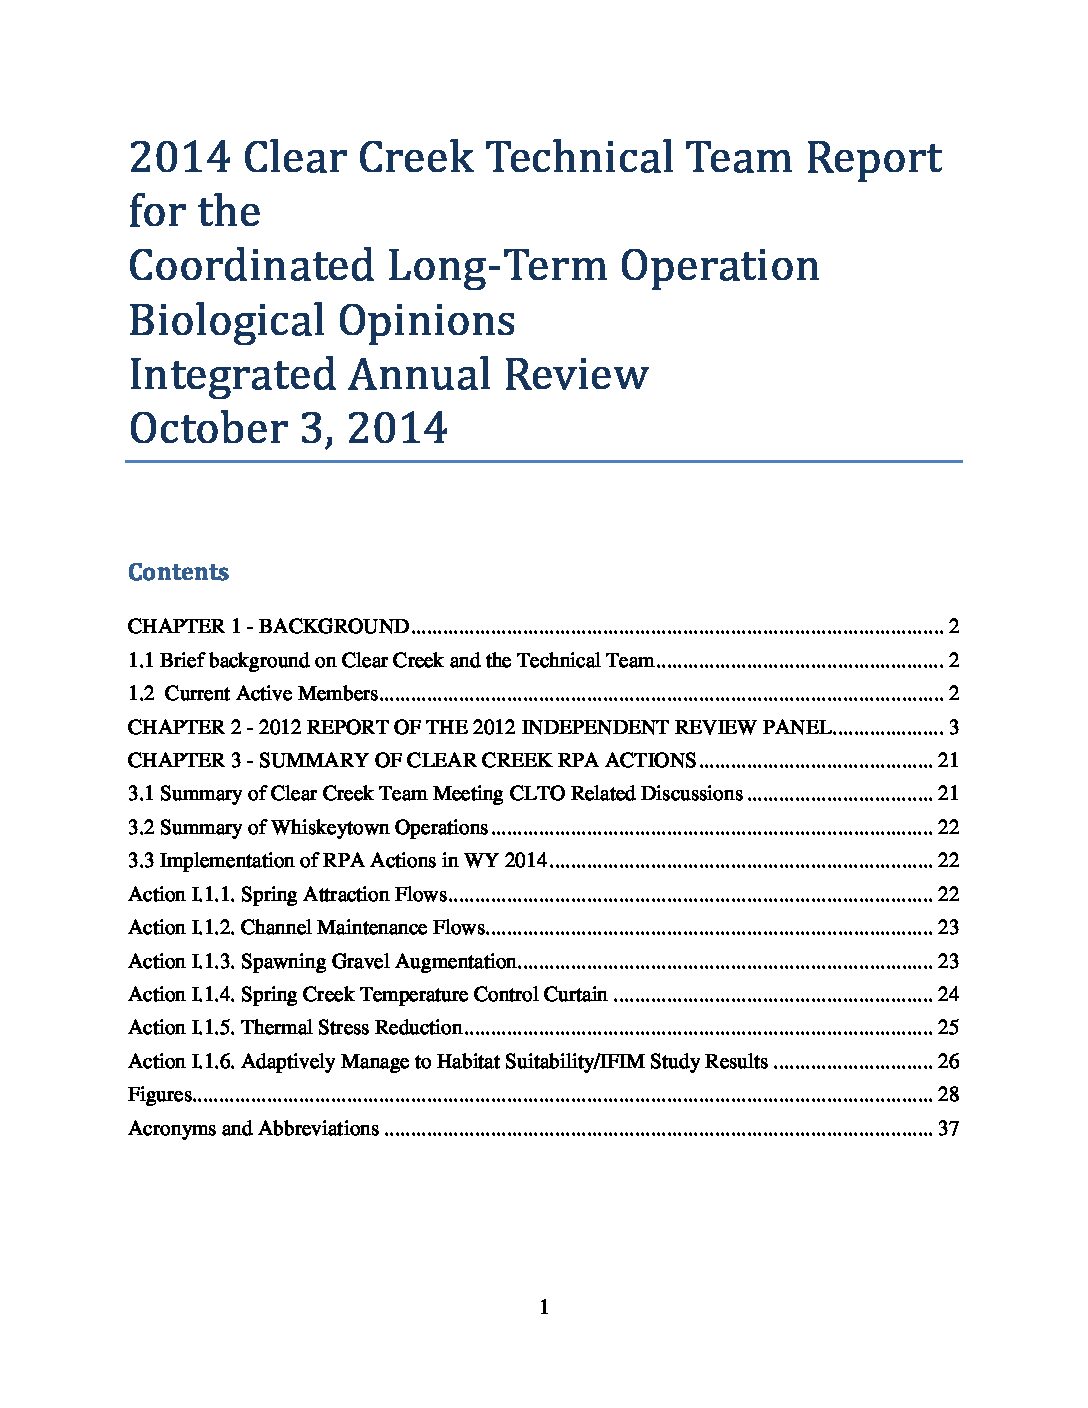 2014 Clear Creek Technical Team Report for the Coordinated Long-Term Operation Biological Opinions Integrated Annual Review October 3, 2014